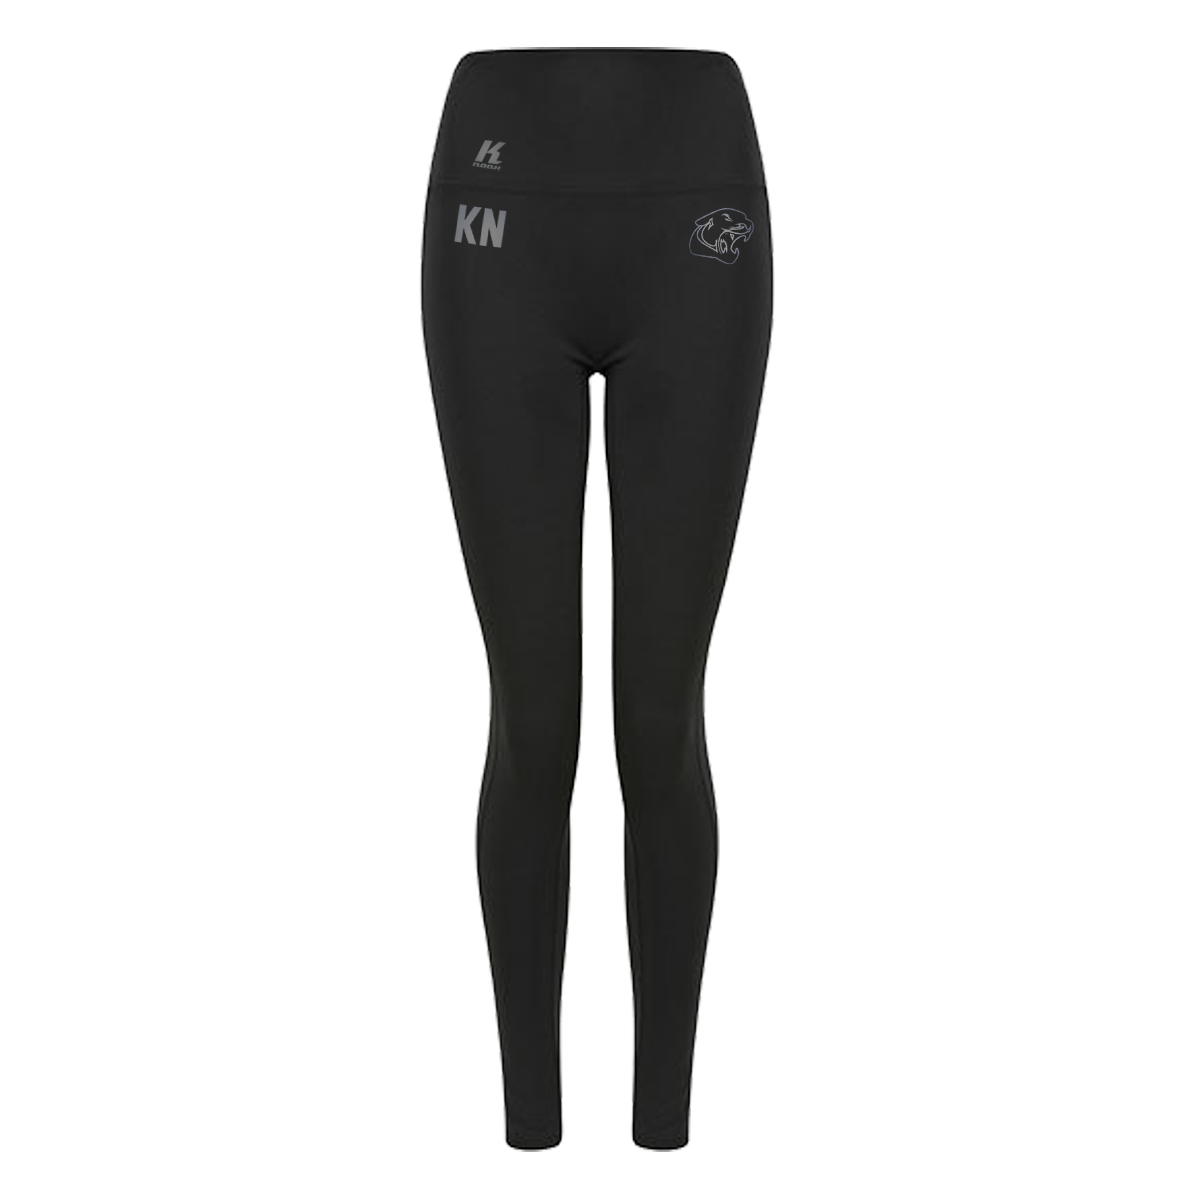 Cougars "Blackline" Womens Core Pocket Legging TL370 with Initials/Playernumber